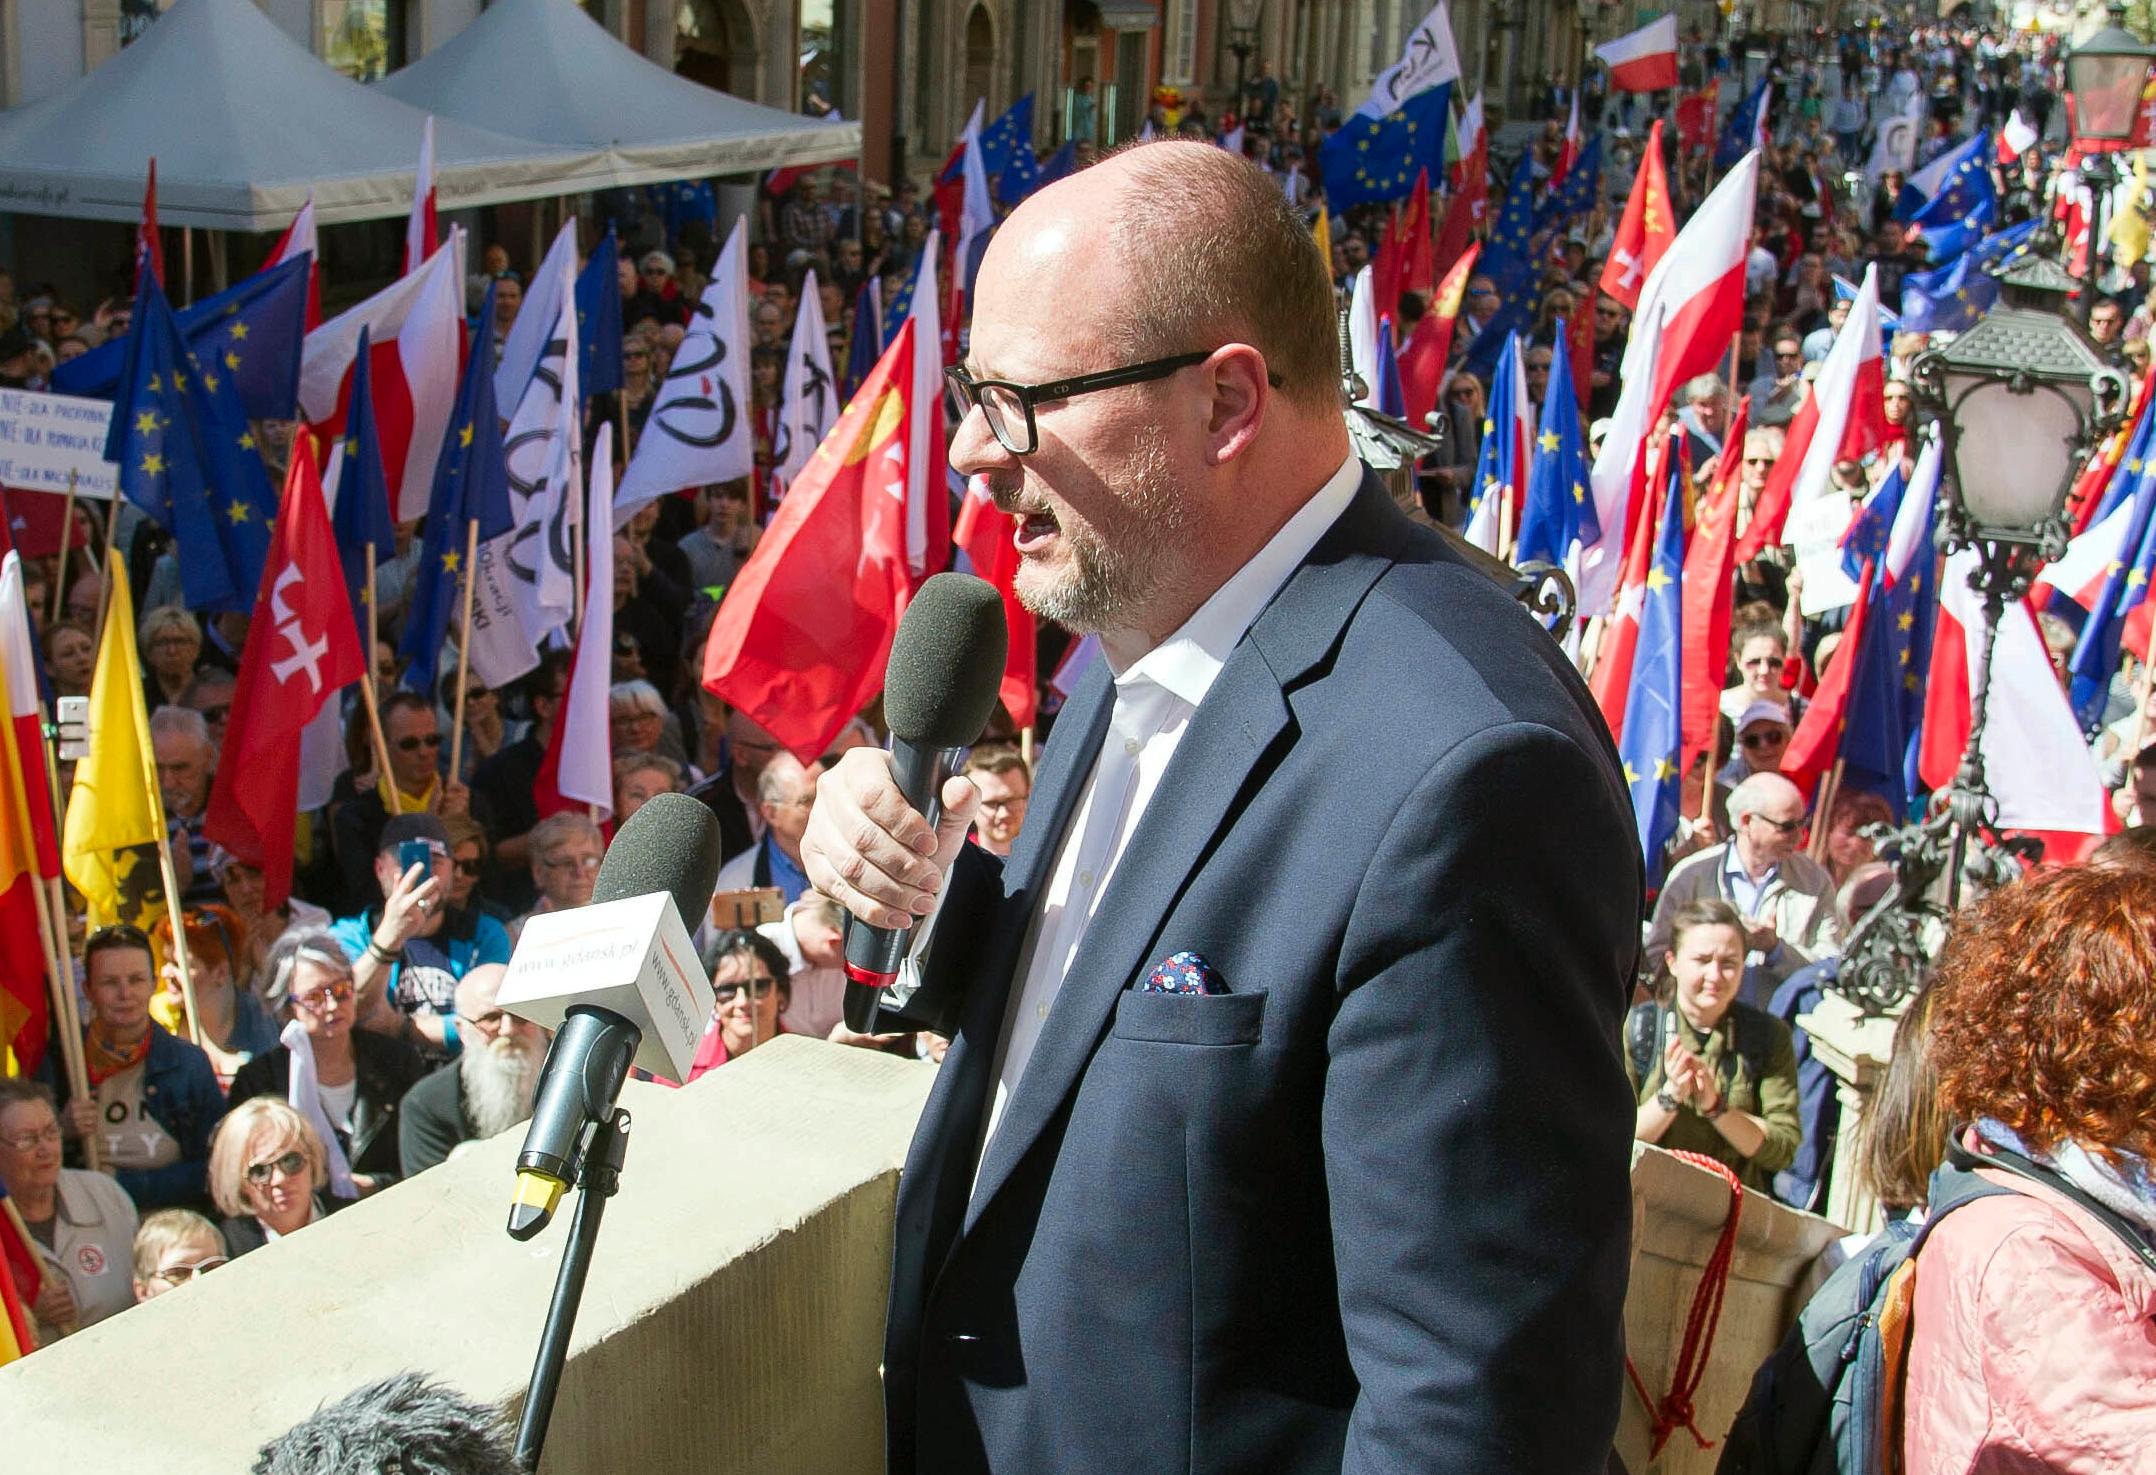 In this Saturday, April 21, 2018 file photo, the mayor of Gdansk, Pawel Adamowicz addresses a rally organized in protest against a recent gathering by far-right groups in this Baltic coast city, in Gdansk, Poland. [File photo: AP /Wojciech Strozyk]